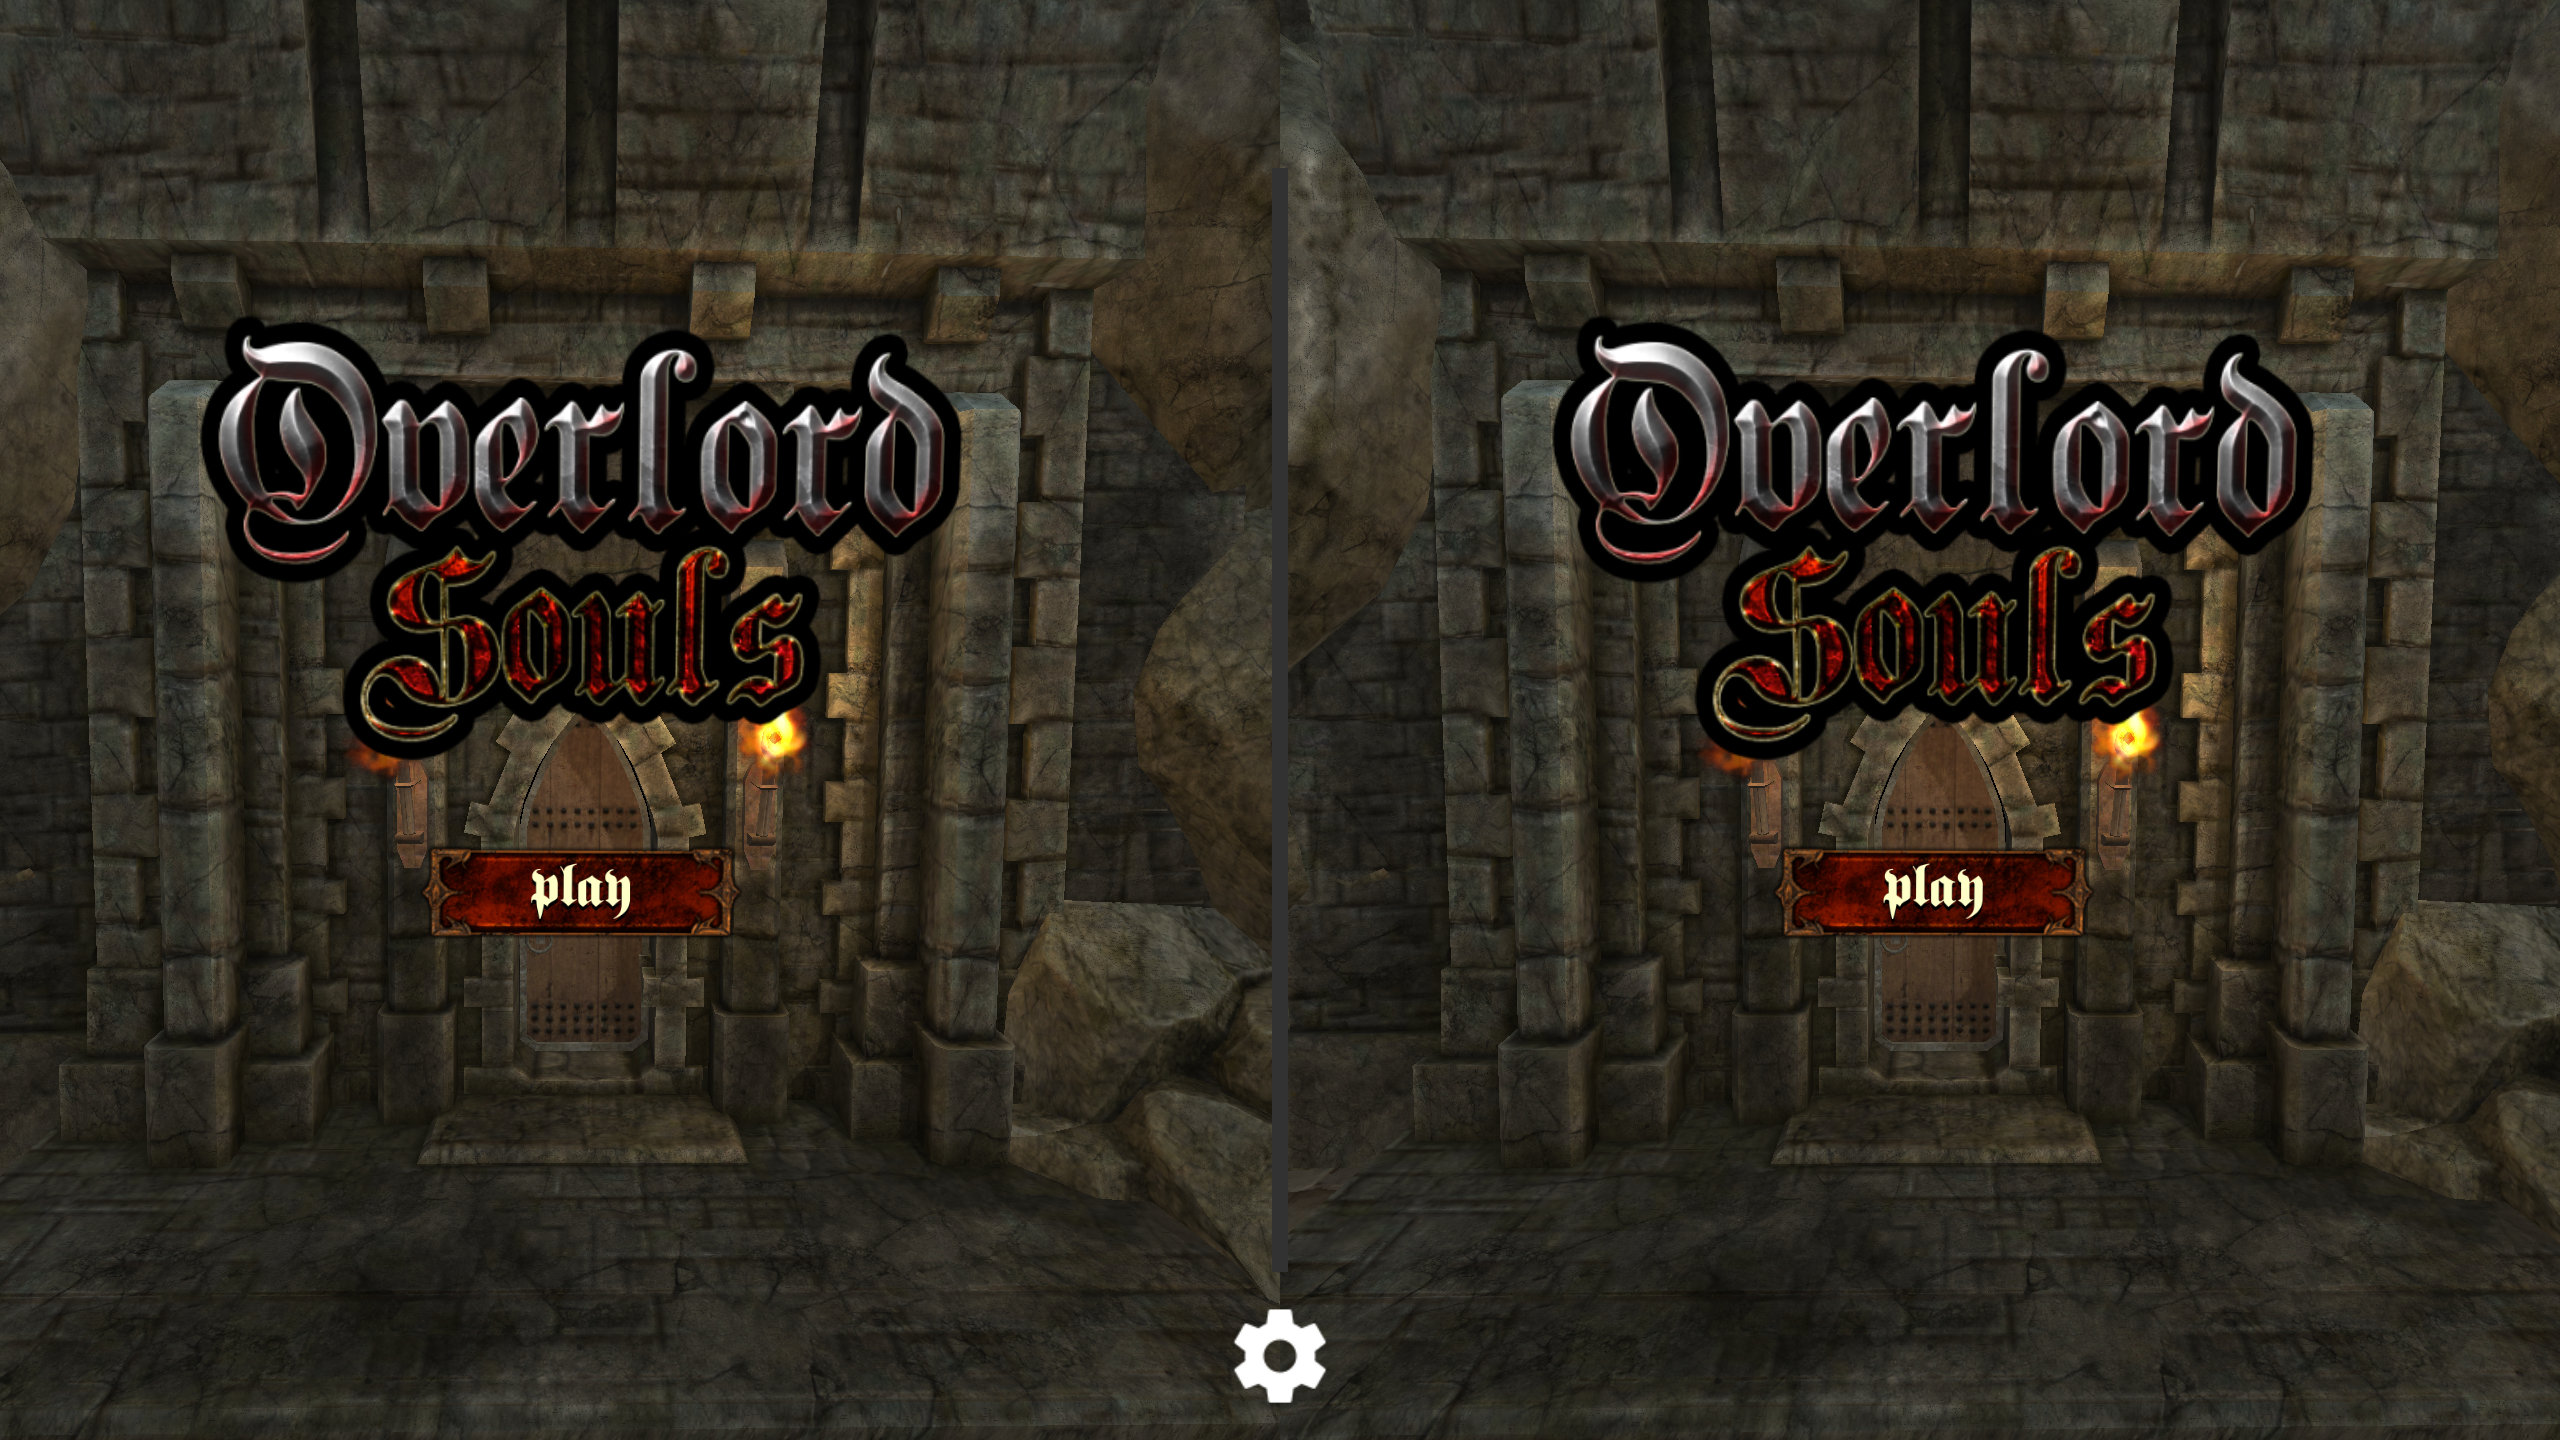 screenshot 2 Overlord Souls content image